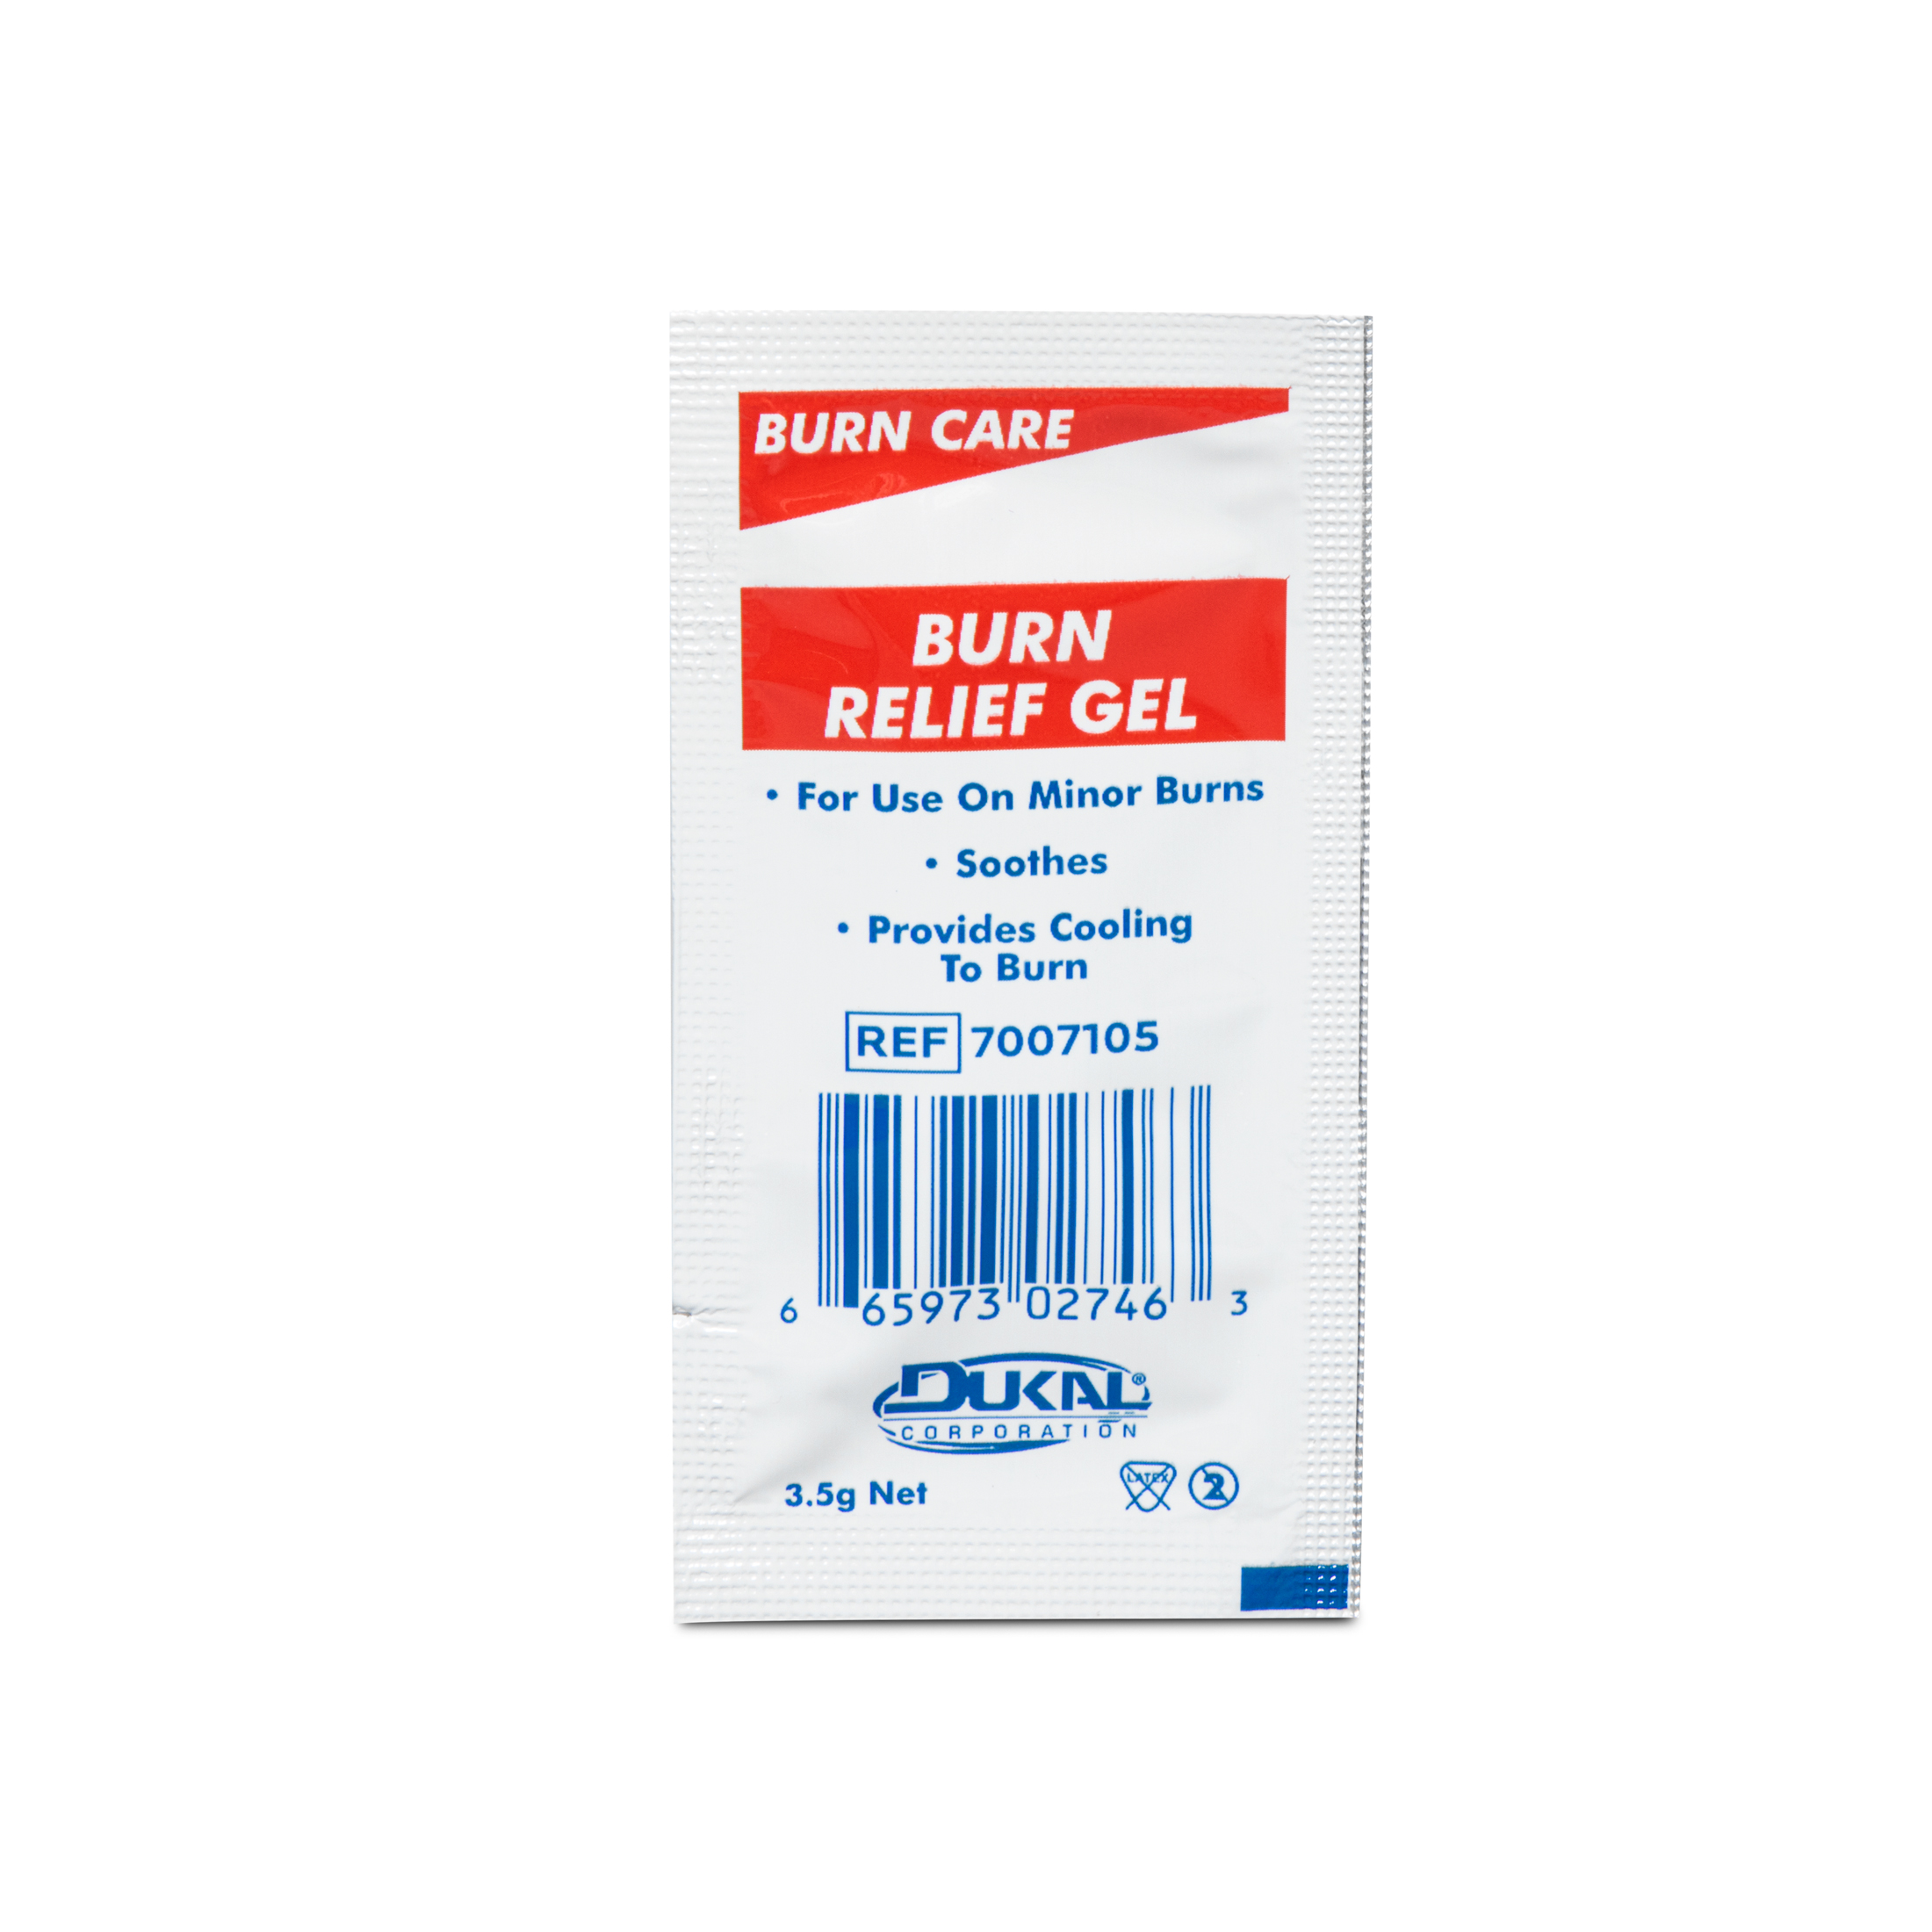 Burn Gel & Creams Products, Supplies and Equipment